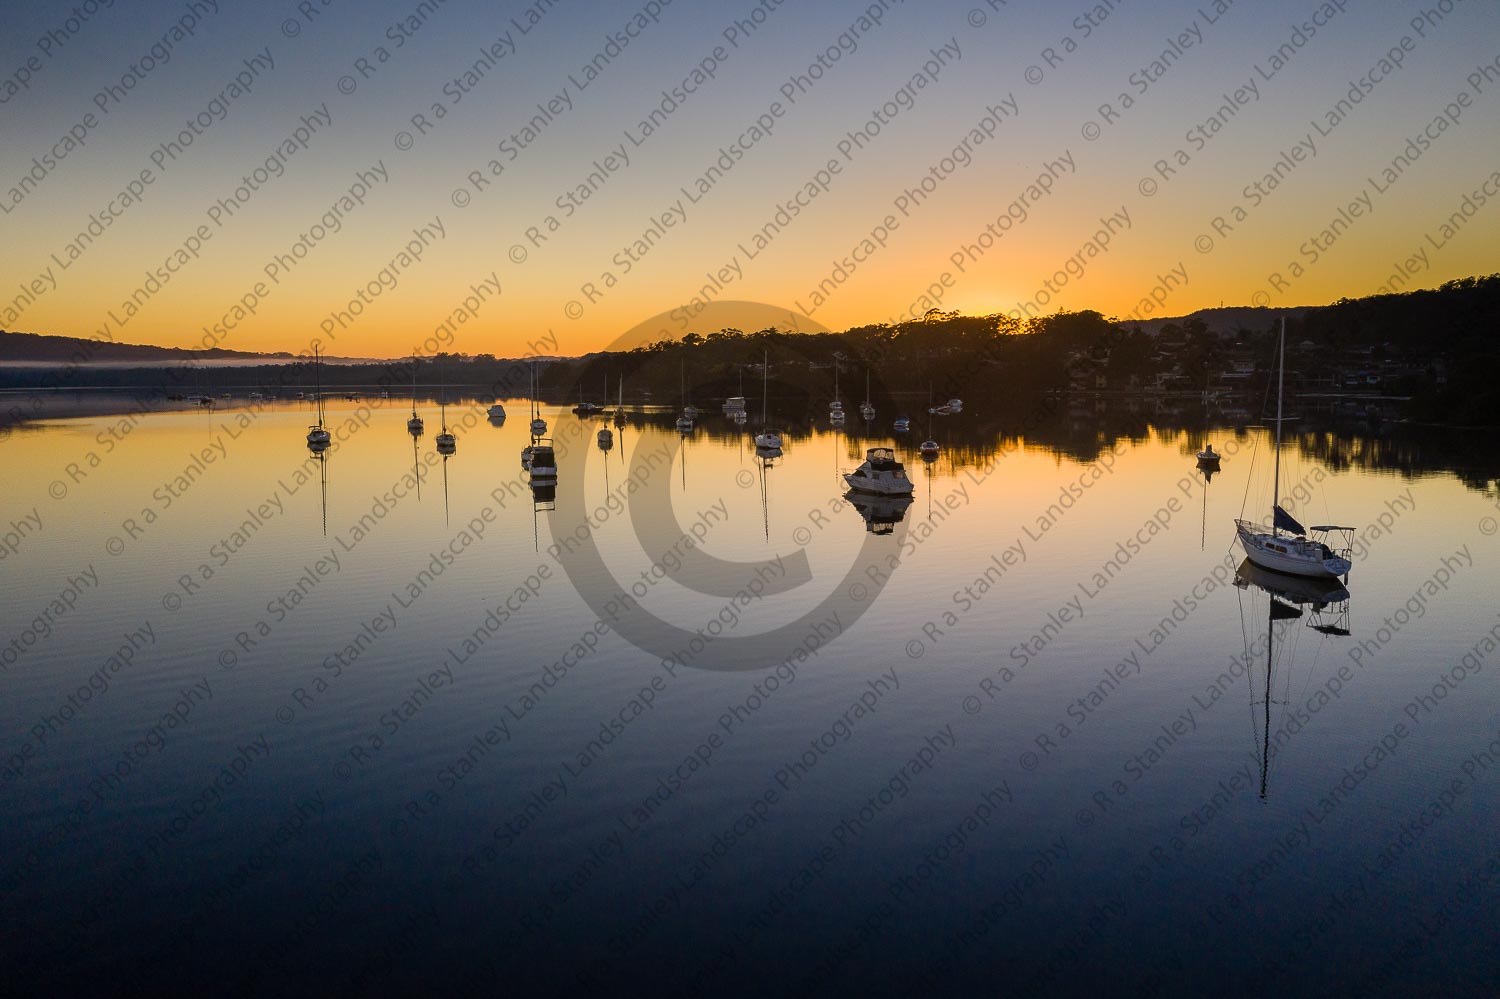 Boats in Calm Water (70543), photo, photograph, image | R a Stanley ...